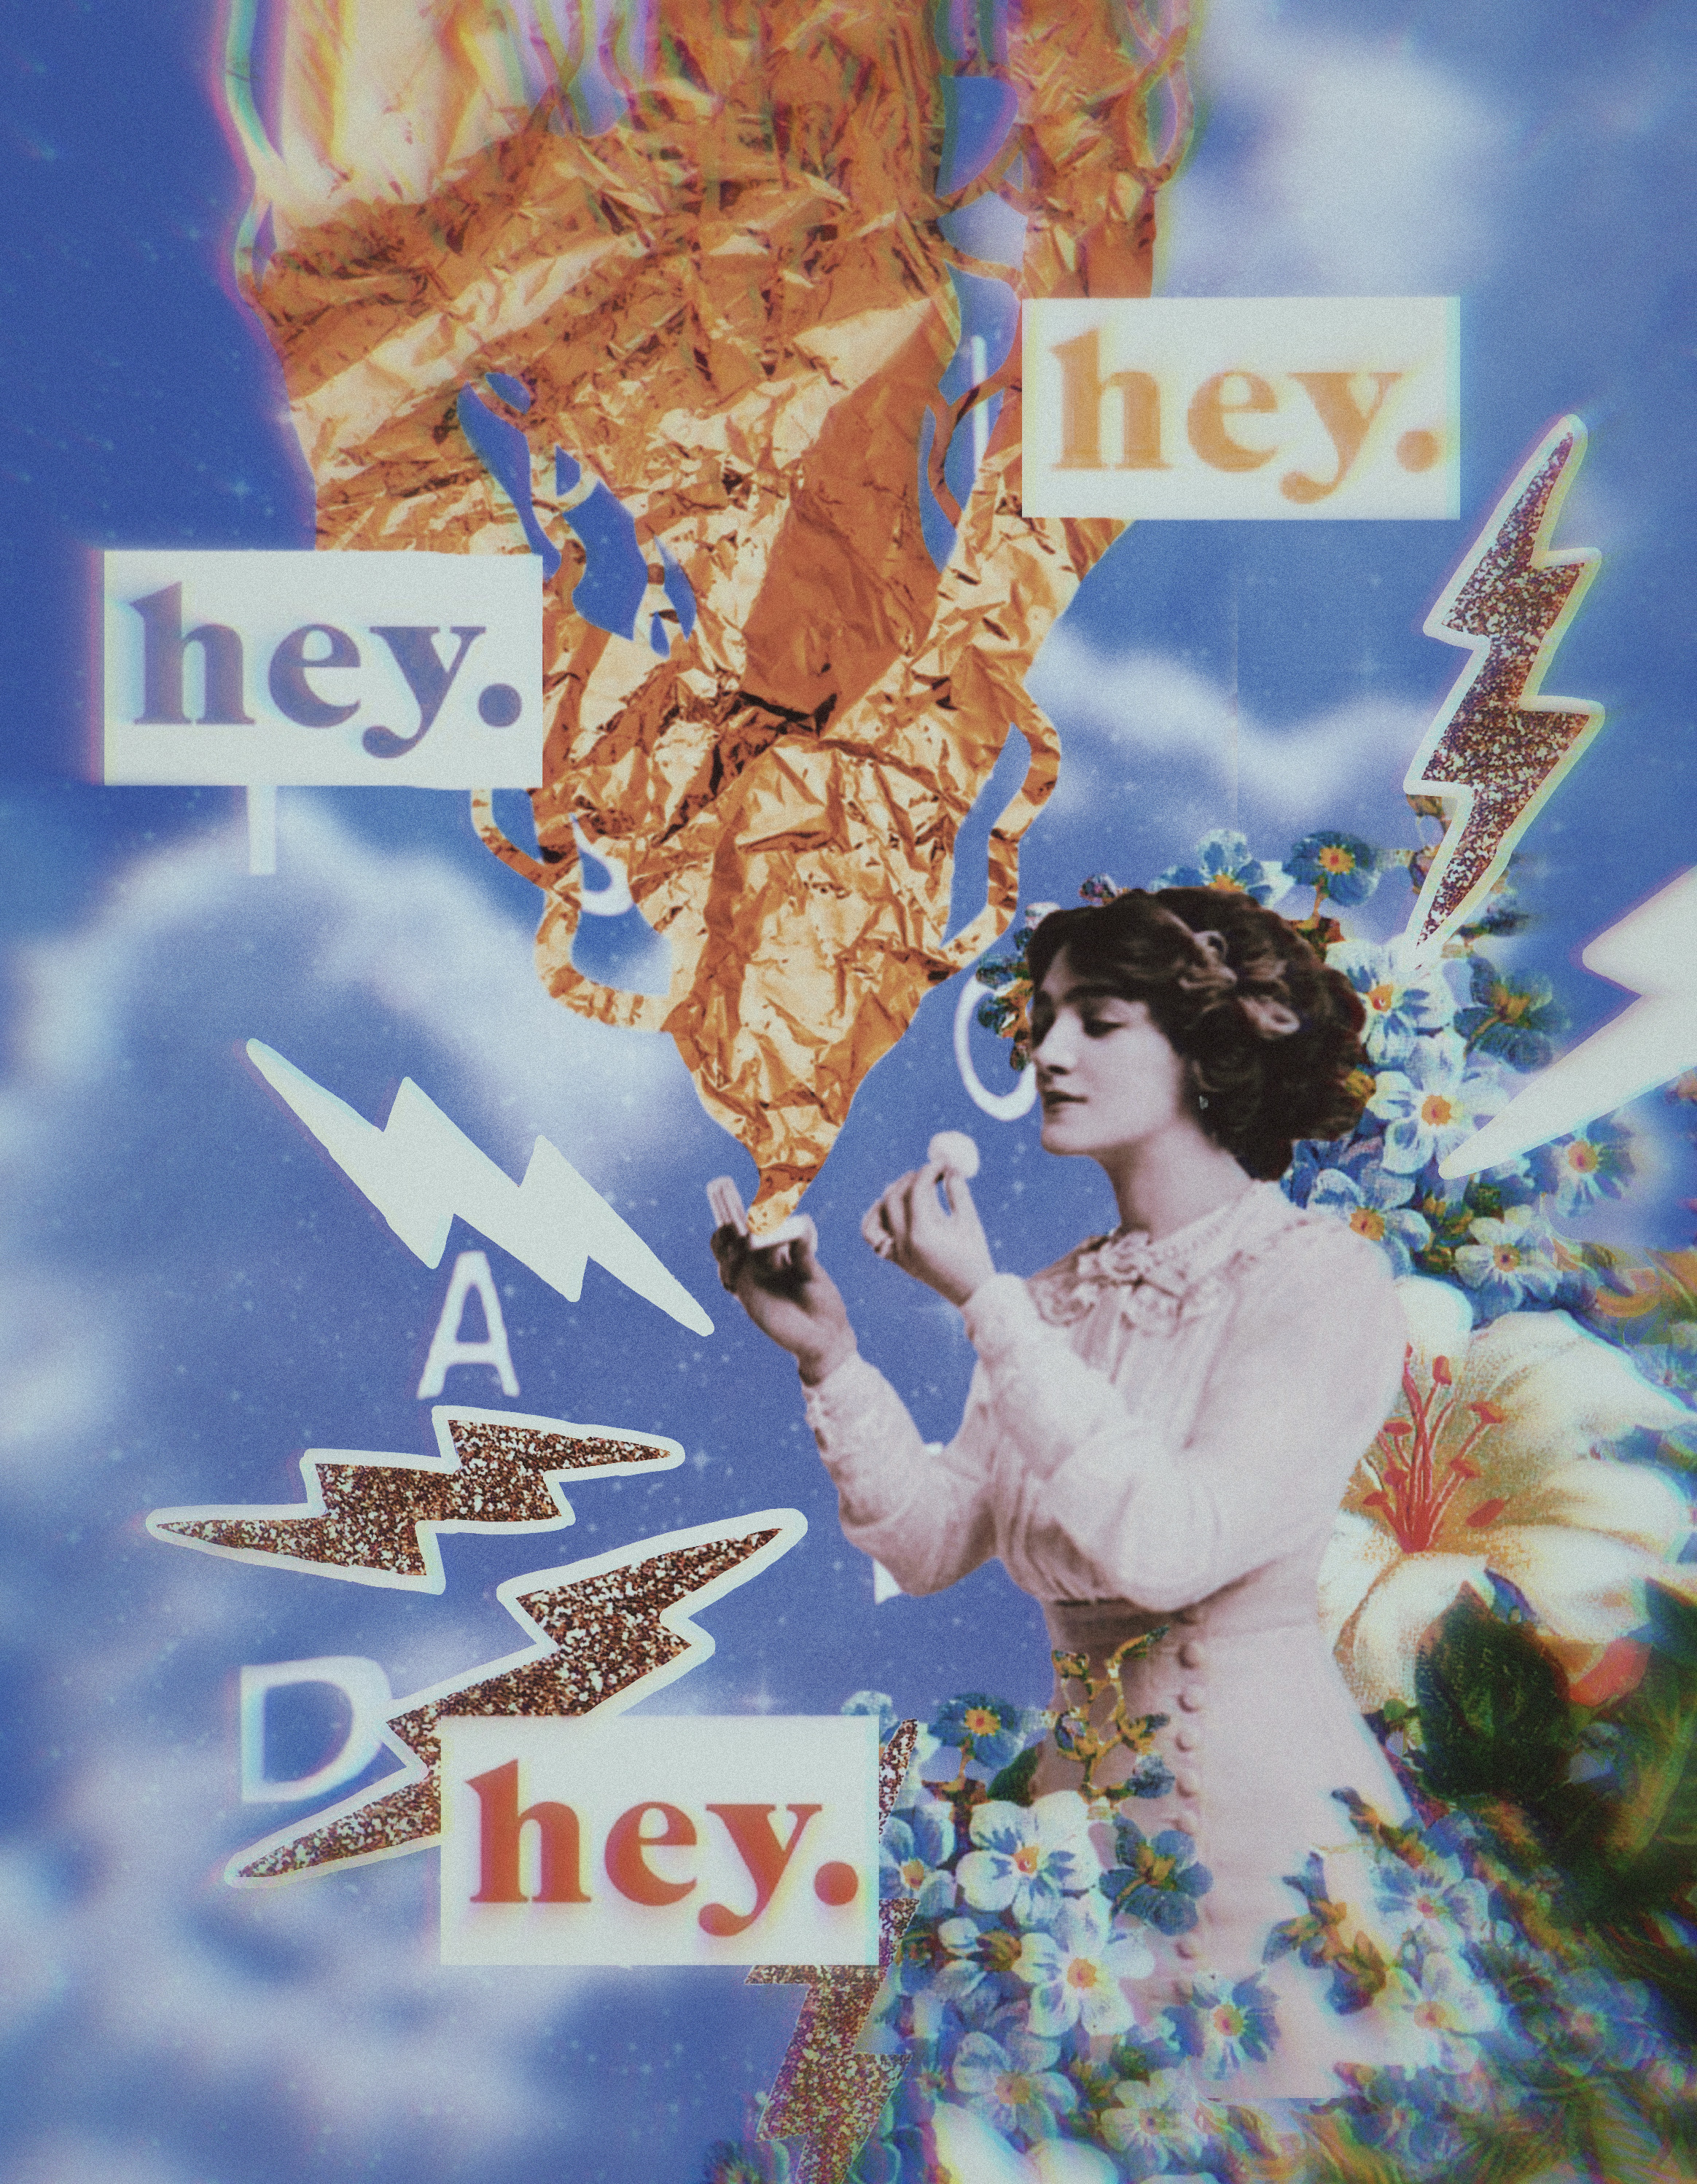 This is my entry for the collab contest by @doggirlinthecity and @cxsmicluv- 💜--#collage #contestentry #vintageaesthetic #collageedit #collageart #coll